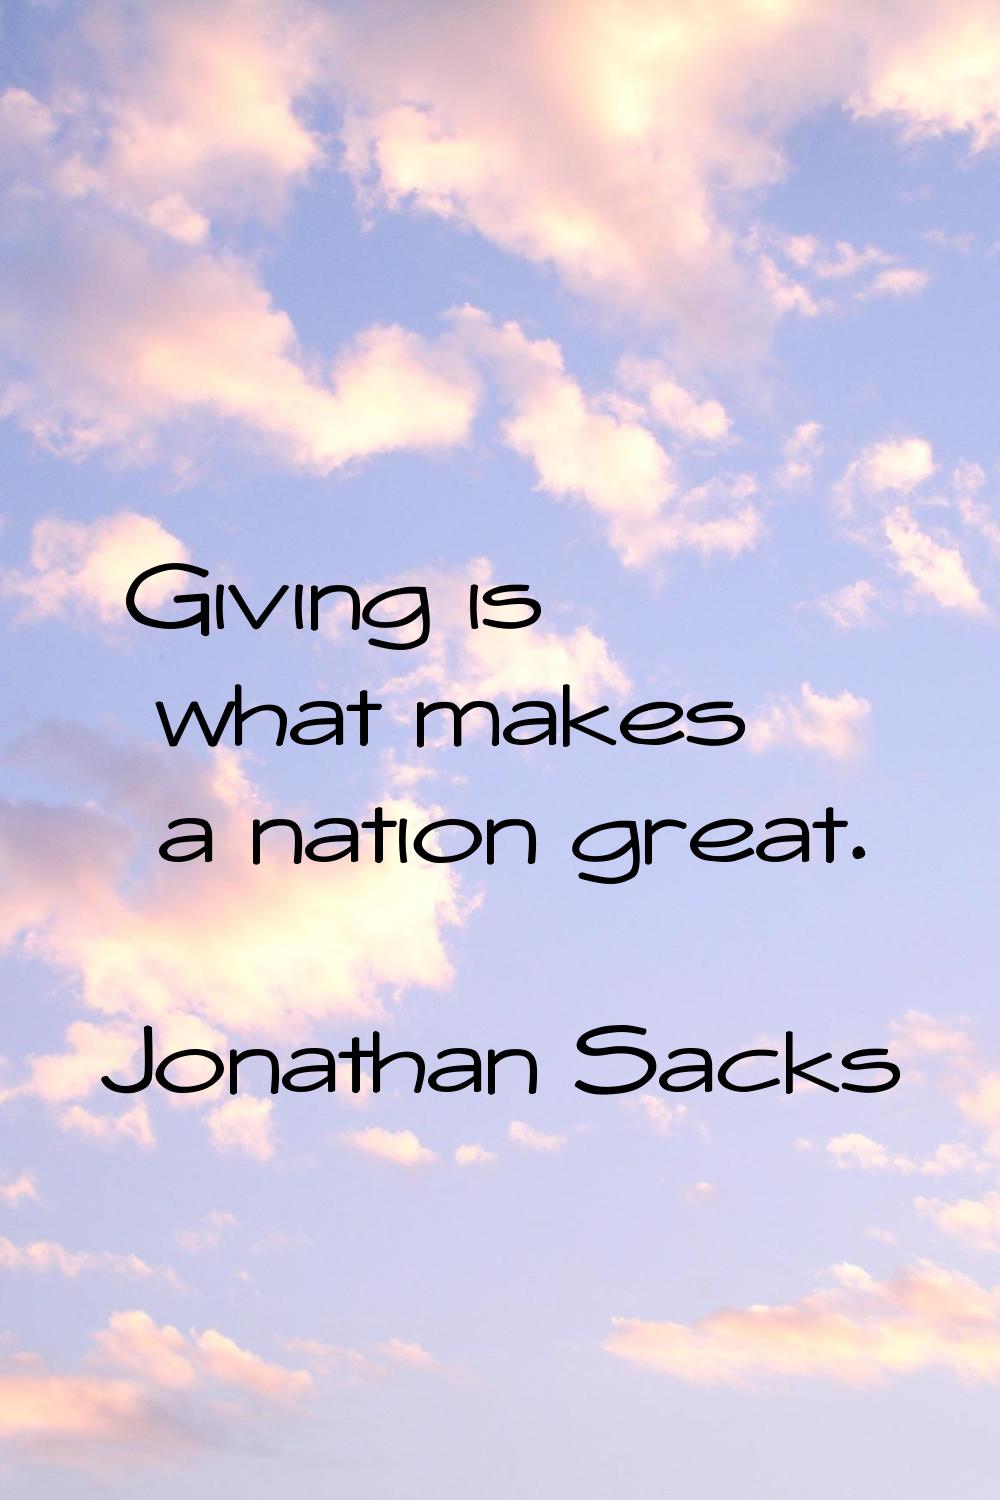 Giving is what makes a nation great.